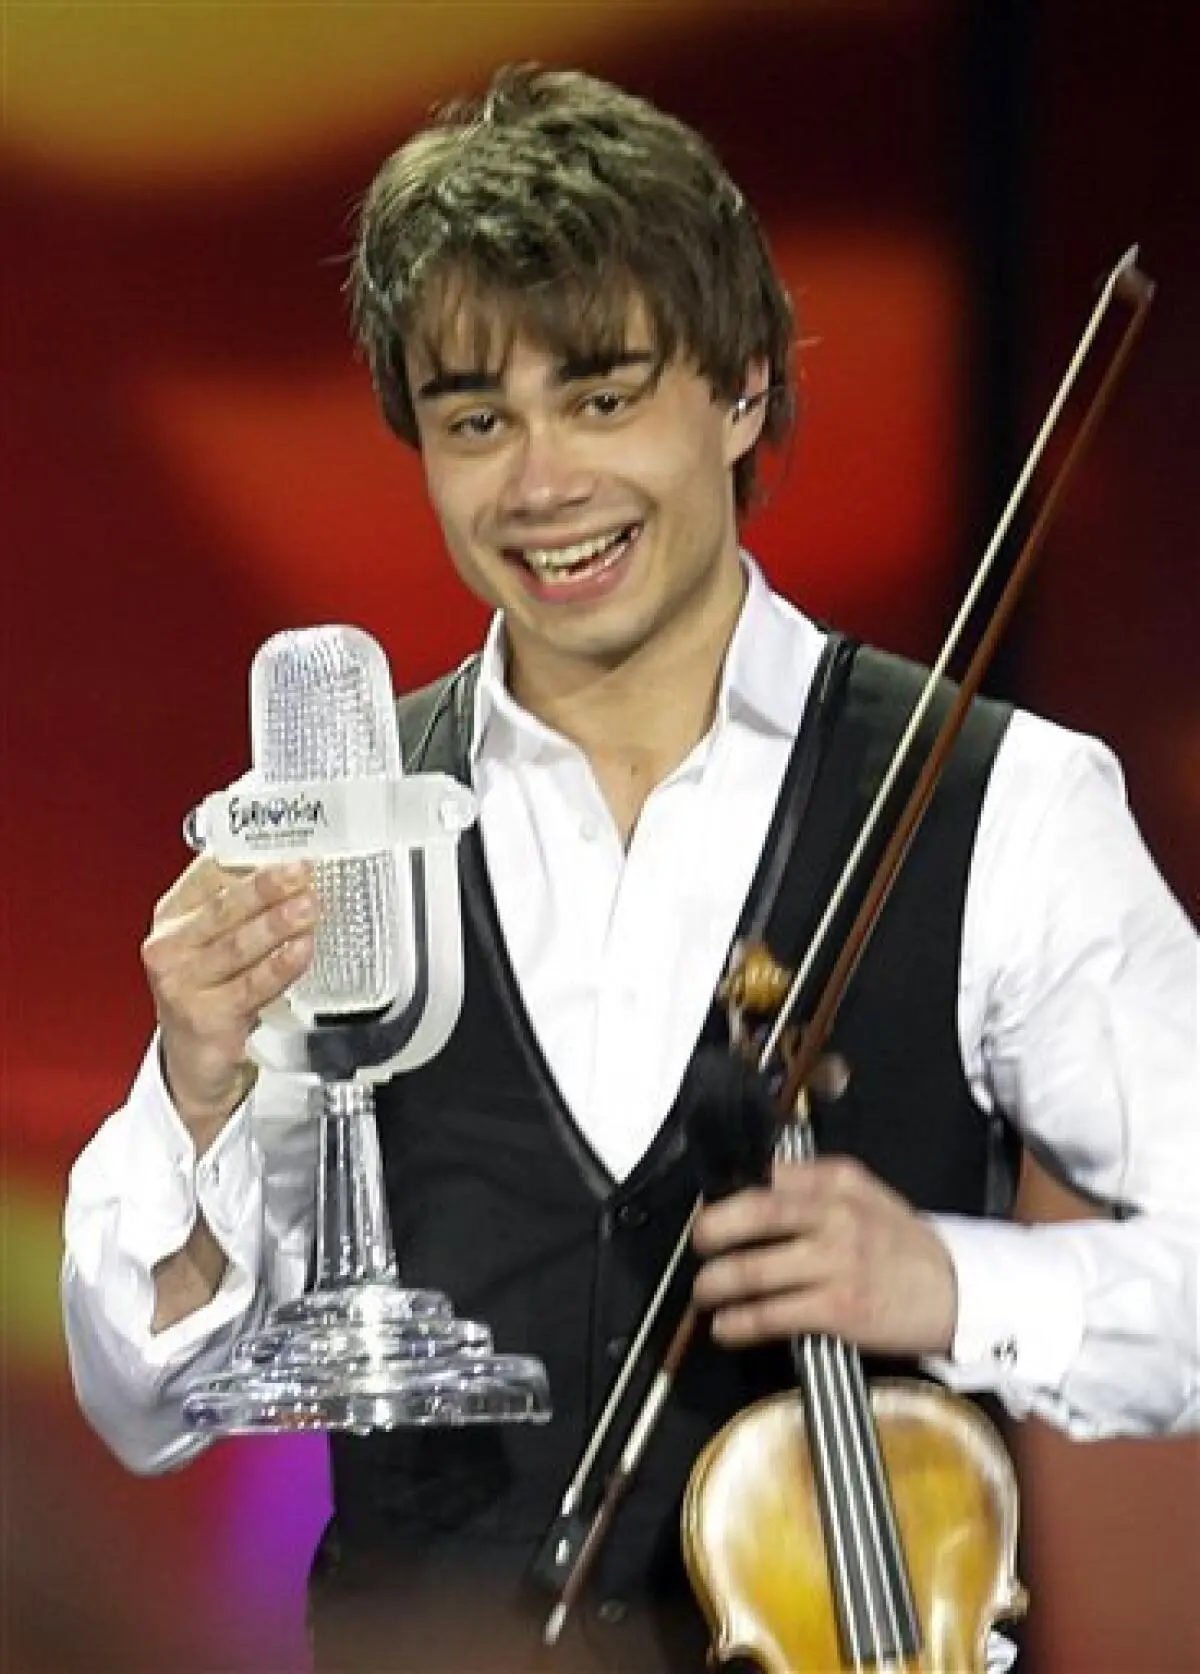 eurovision violin winner - Who is the famous Eurovision winner